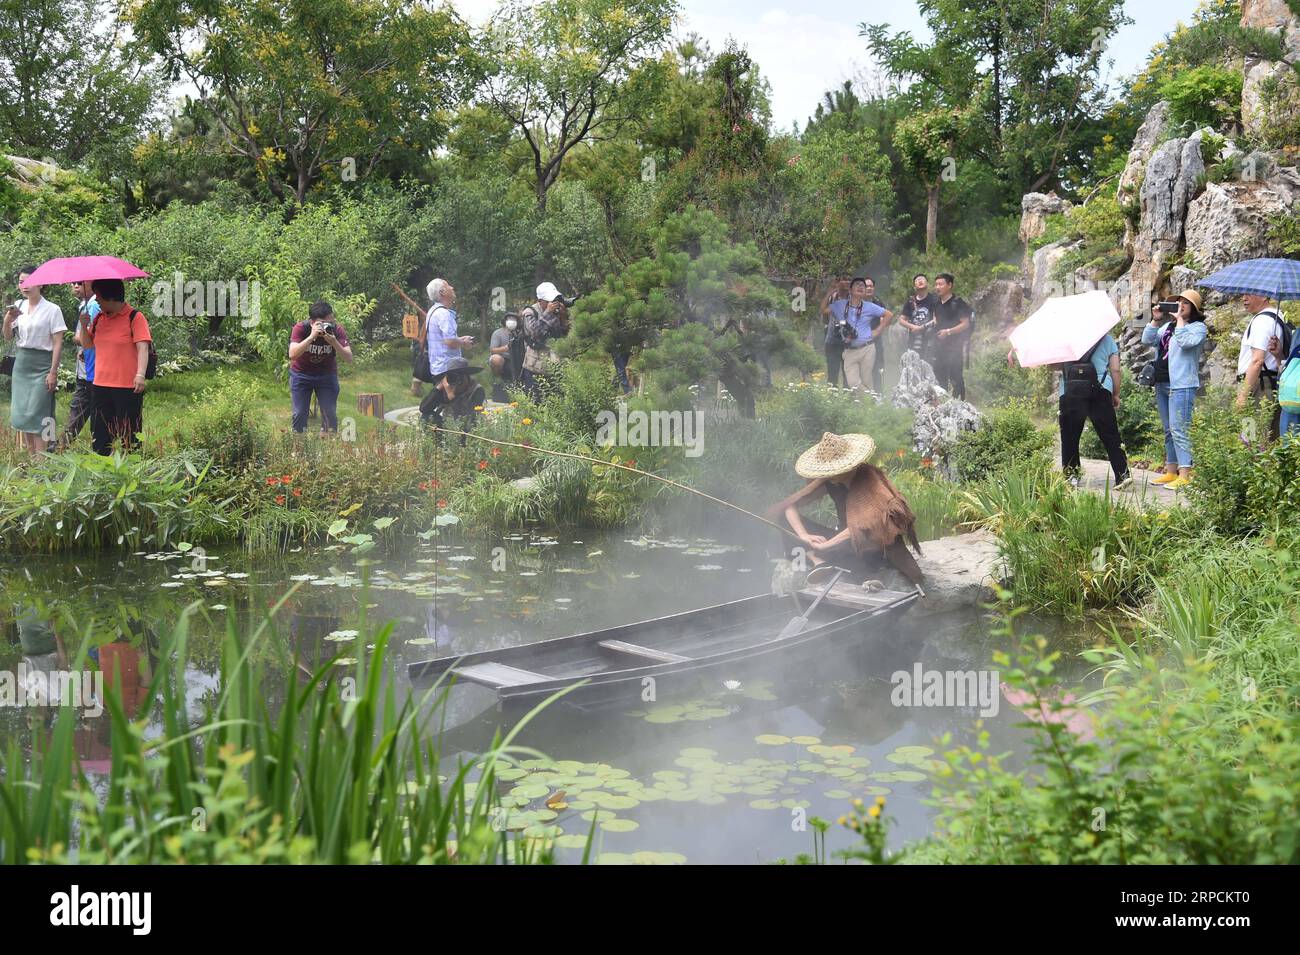 (190708) -- BEIJING, July 8, 2019 -- Tourists visit the Hunan Garden at the Beijing International Horticultural Exhibition in Beijing, capital of China, July 7, 2019. Located in central China, Hunan Province is well-known for its varied topography. It abuts the Dongting Lake to the north, and the east, south and west sides of the province are surrounded by mountains, with Wuling and Xuefeng Mountains to the west, Nanling Mountain to the south, Luoxiao and Mufu Mountains to the east. The Xiangjiang, Zijiang, Yuanjiang and Lishui Rivers converge on the Yangtze River at the Dongting Lake in the n Stock Photo